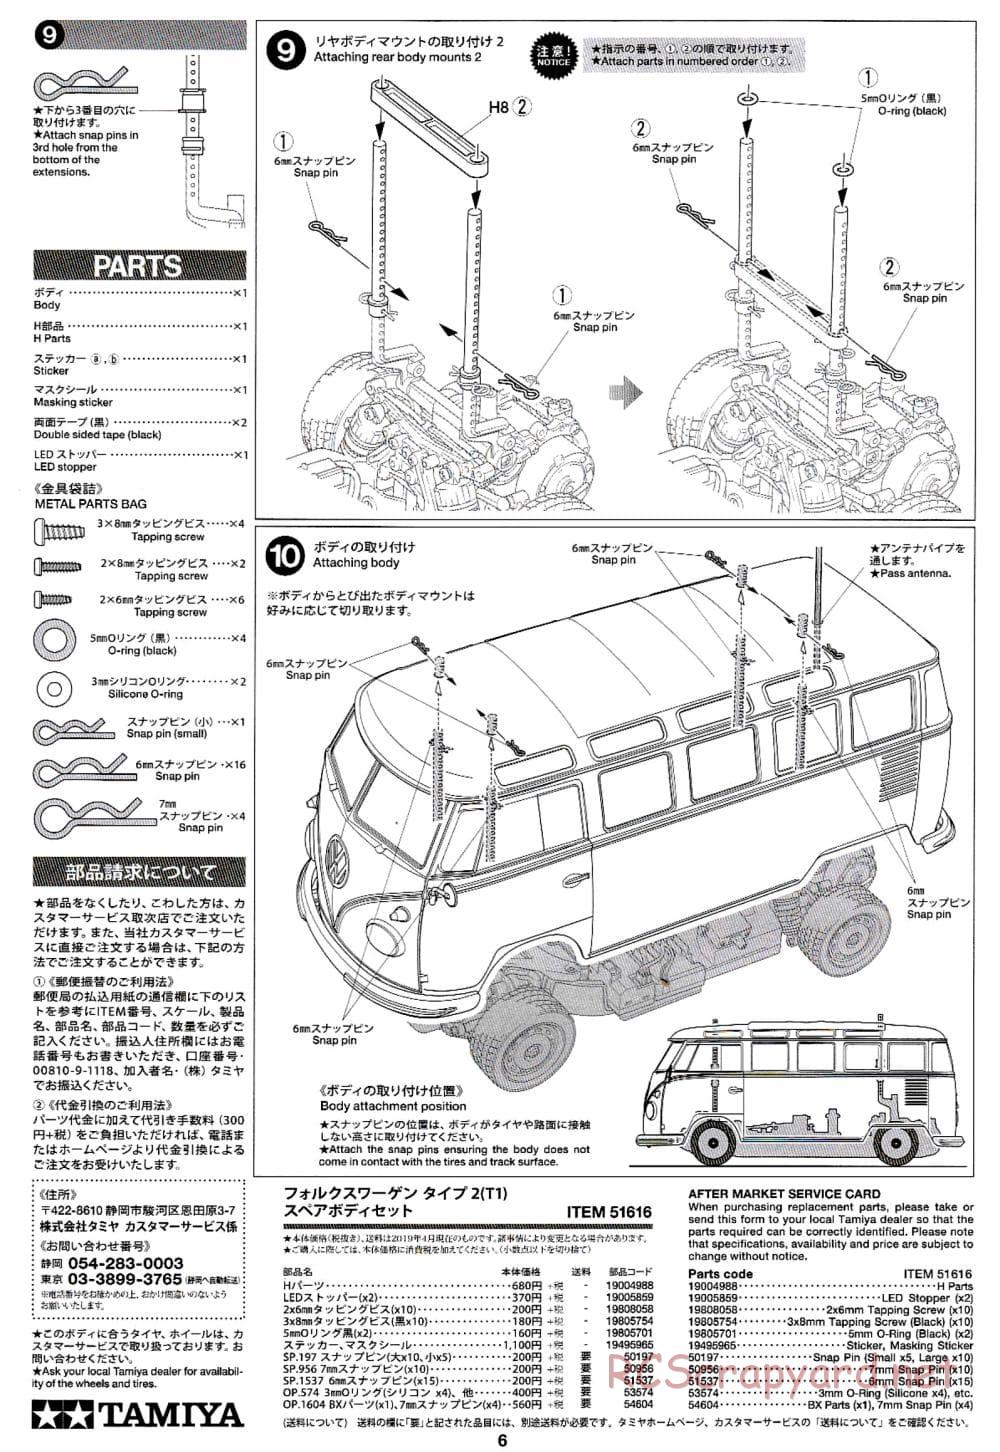 Tamiya - Volkswagen Type 2 (T1) - M-06 Chassis - Body Manual - Page 6